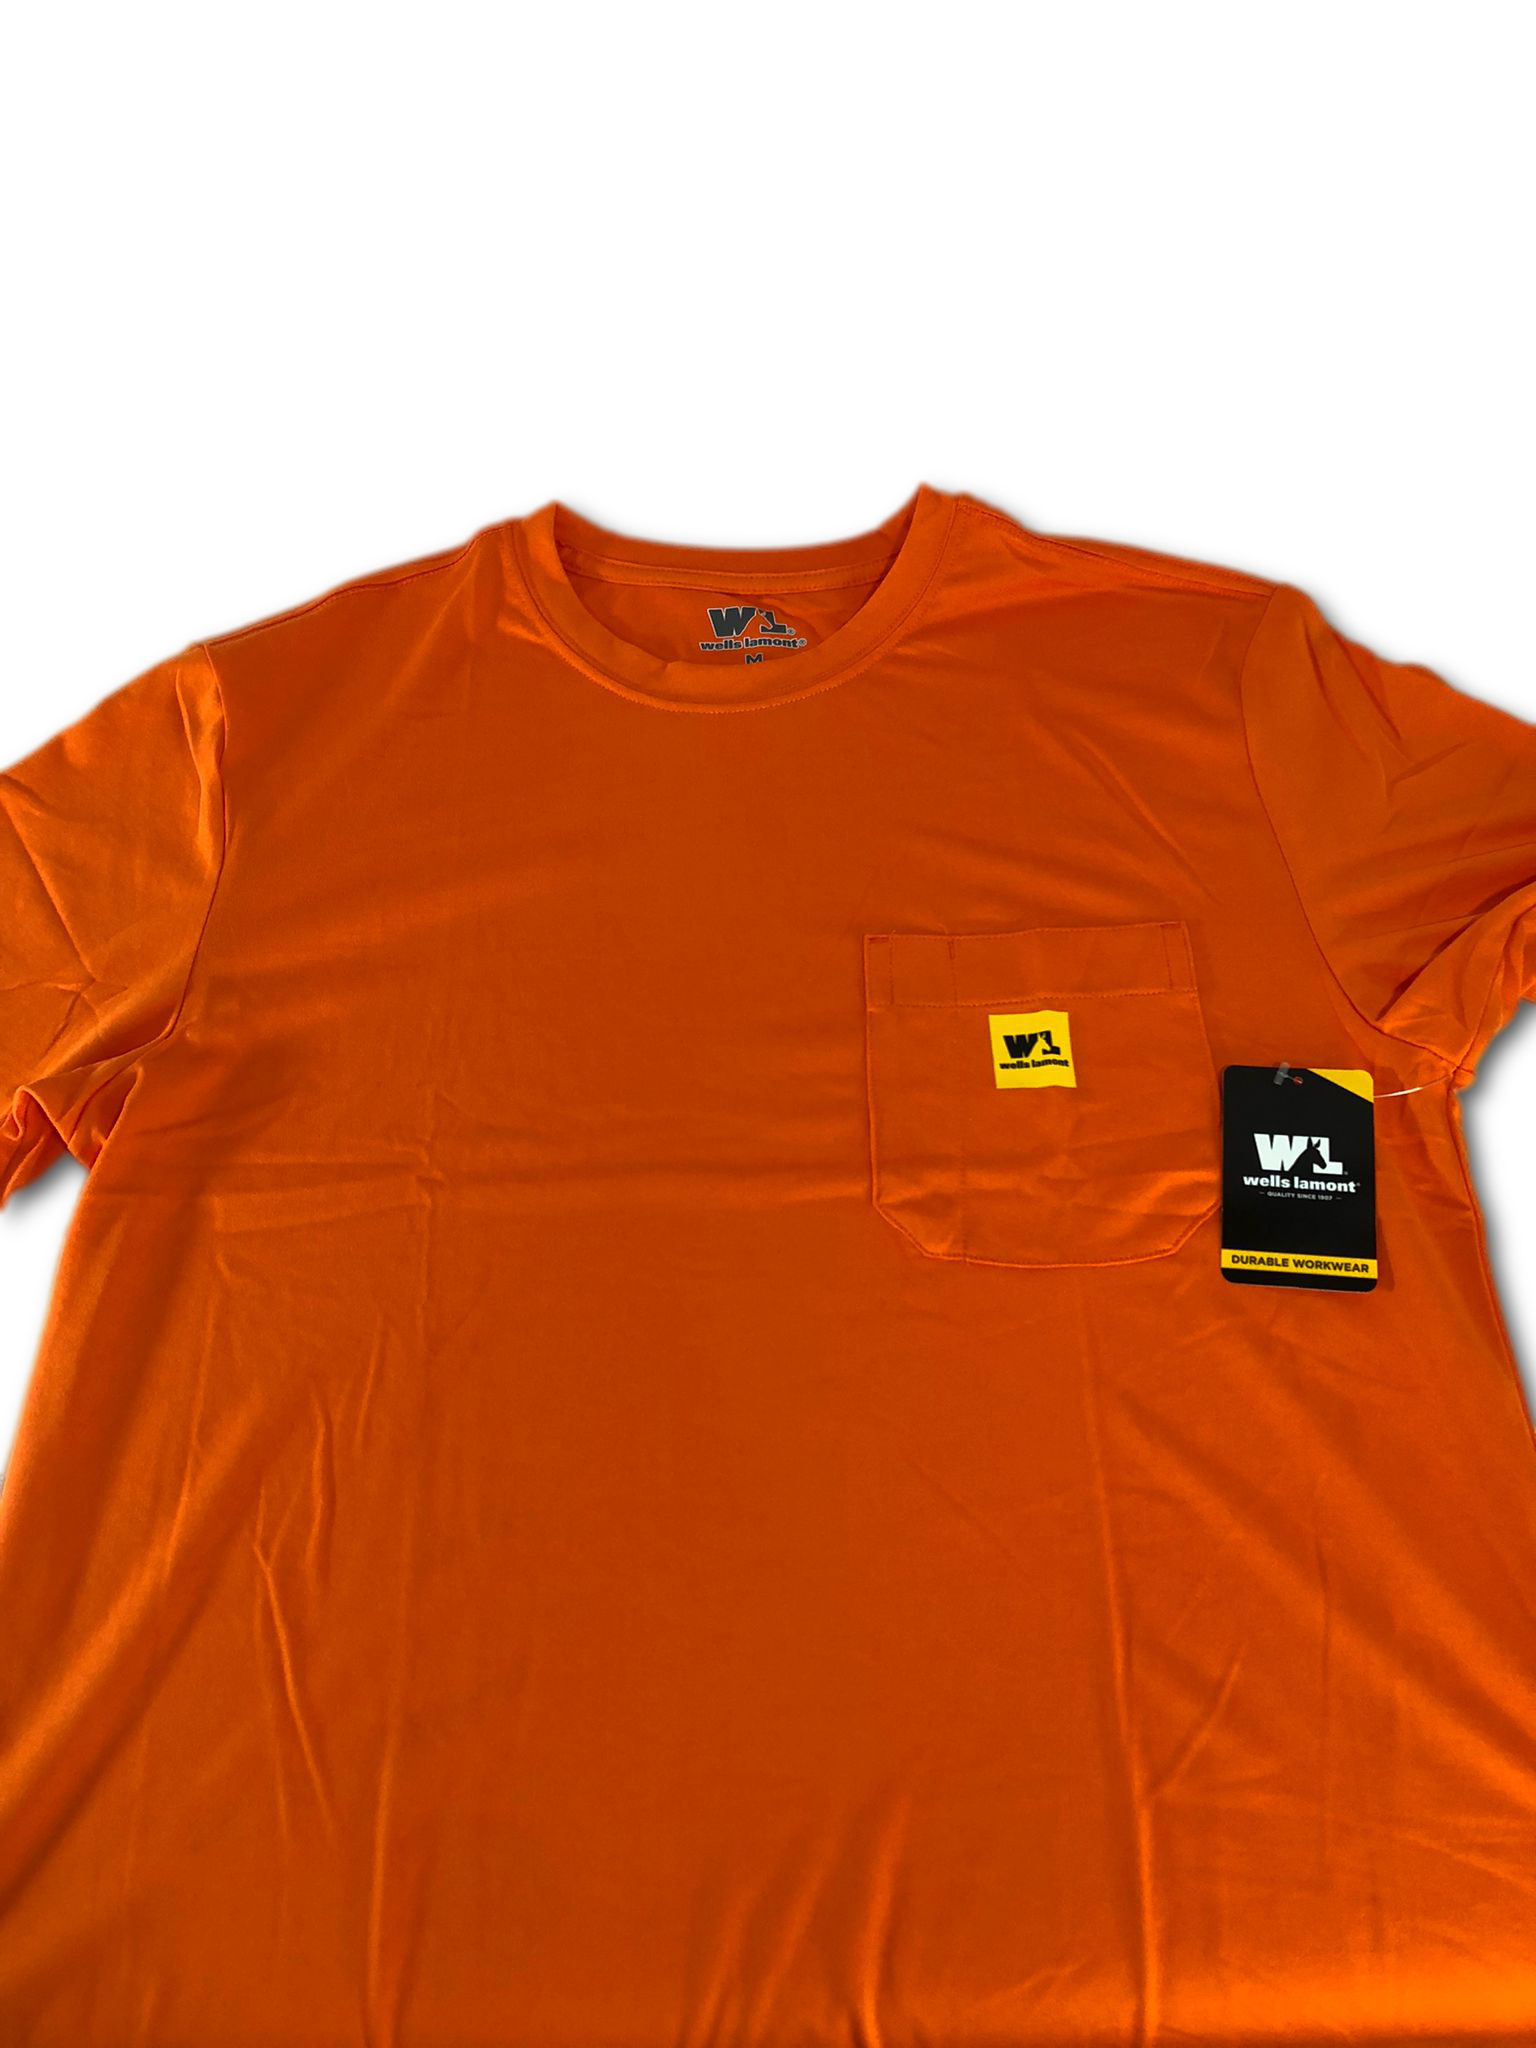 Men's Performance Pocket Tee - Moisture Wicking, Odor Resistant, Relaxed Fit